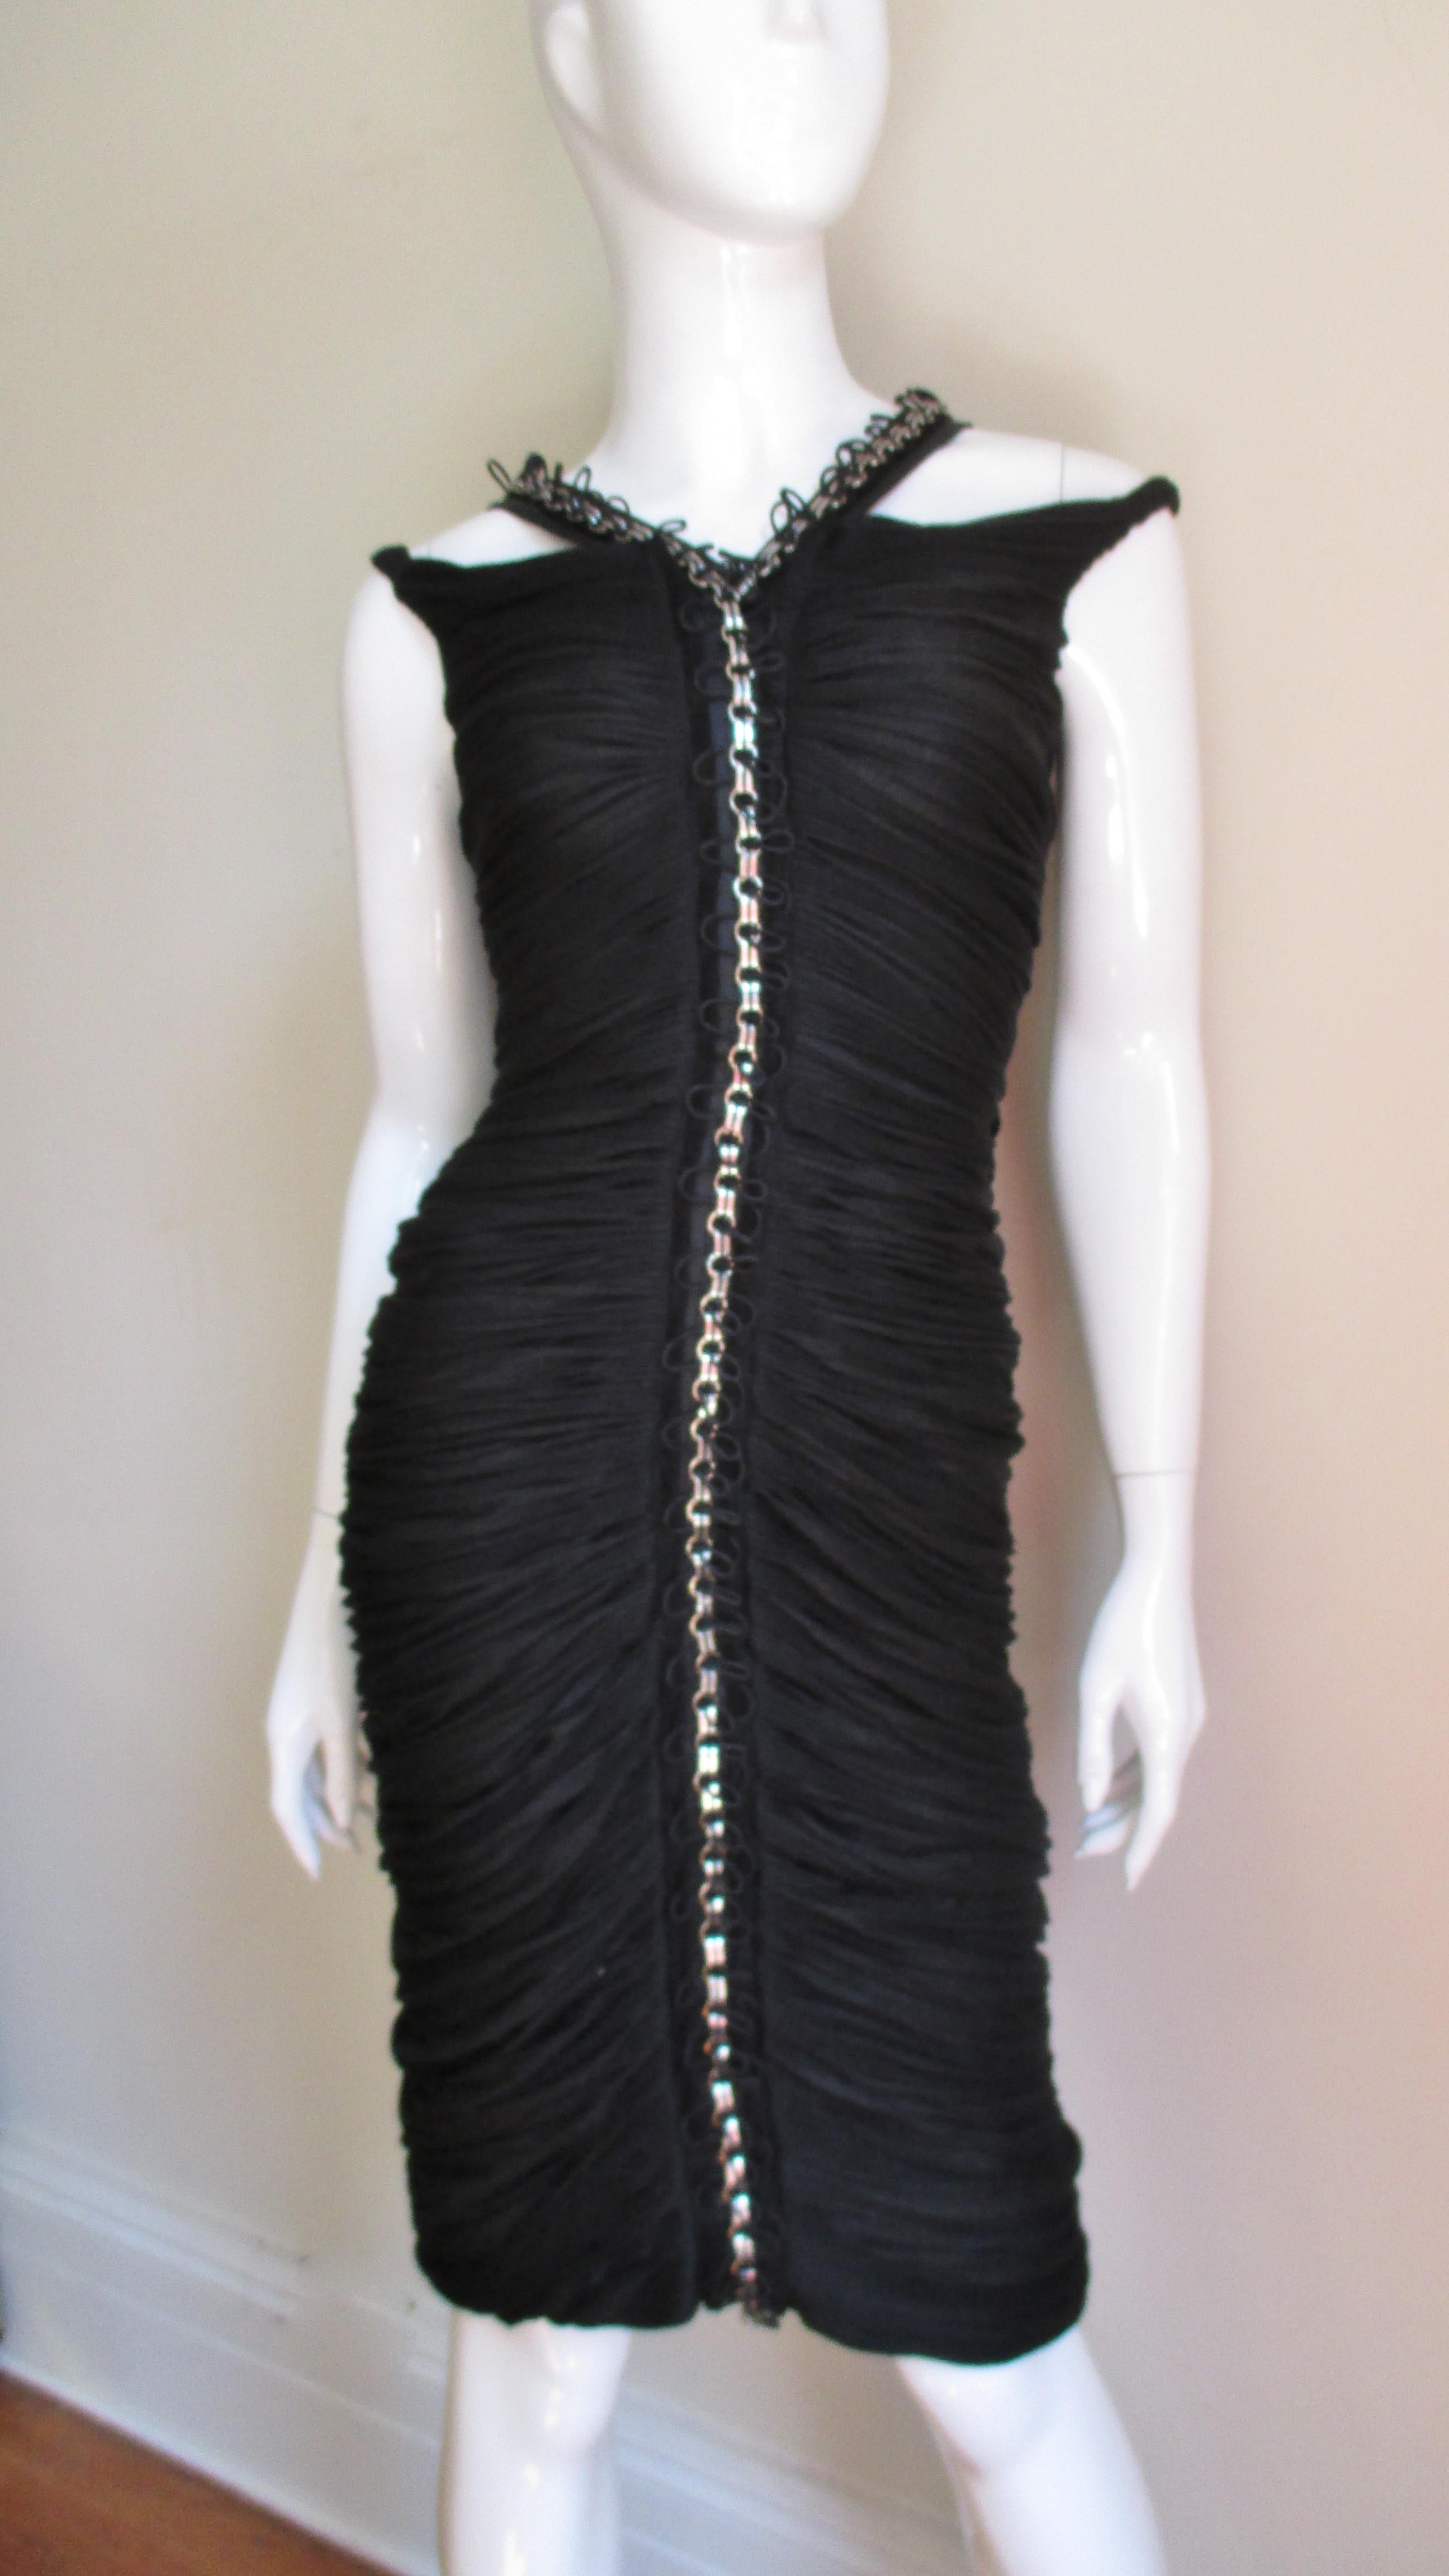 This dress is amazing.  Made of a rich black delicate light weight silk blend knit ruched horizontally across the dresses entire length front and back.  It is fitted and where the ruching meets in the center front and back it is accented with silk